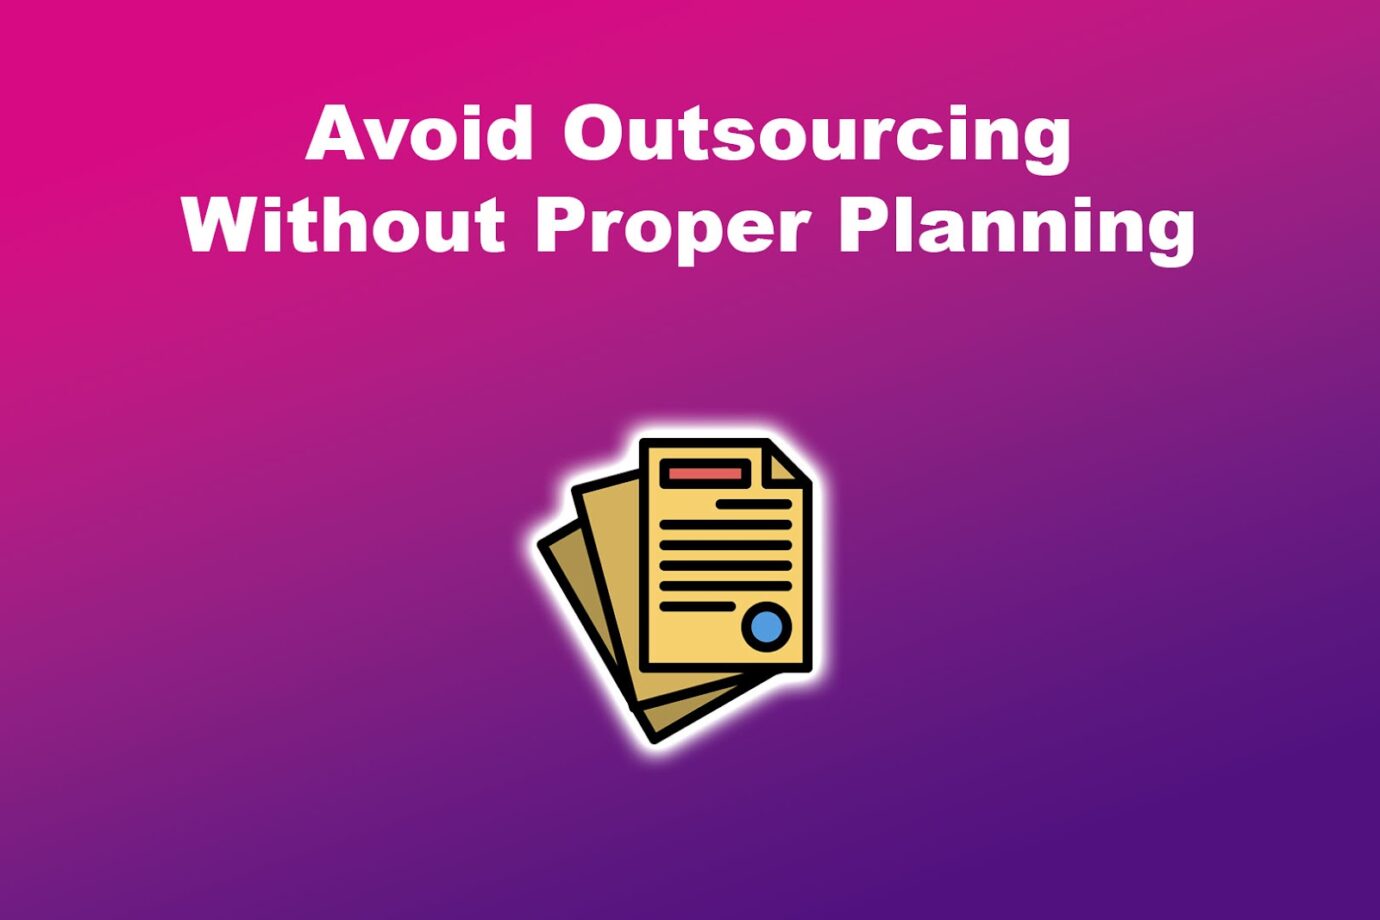 Avoid Outsourcing Without Proper Planning